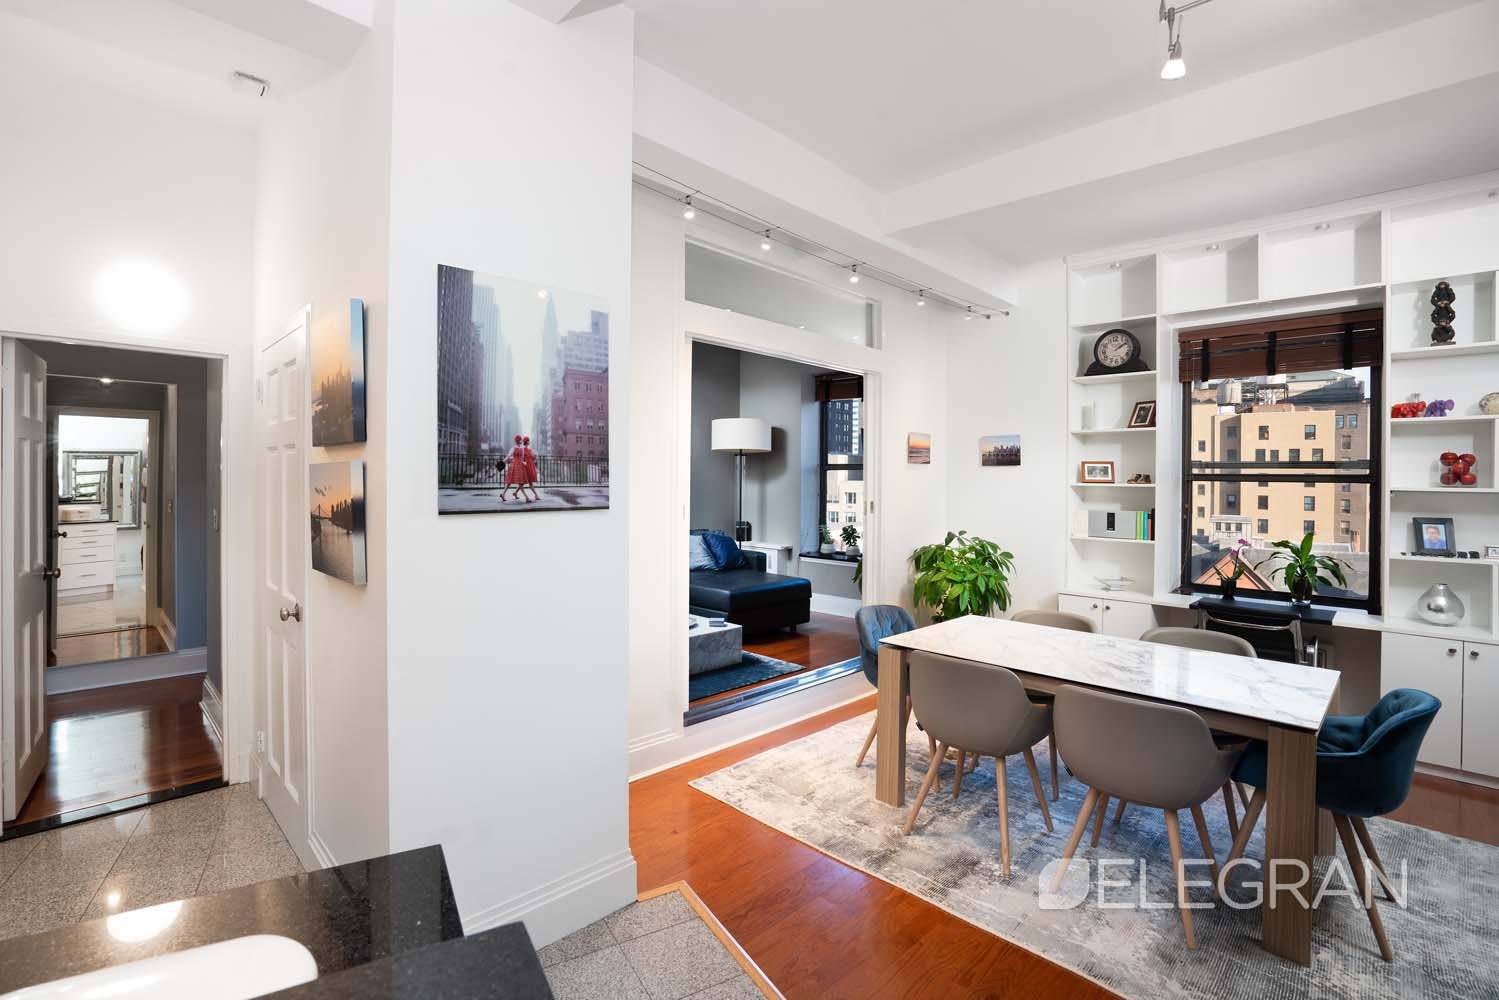 Unit 9C, at 150 Joralemon Street gives you the ability to own in a literal Brooklyn Heights landmark while having an updated space.